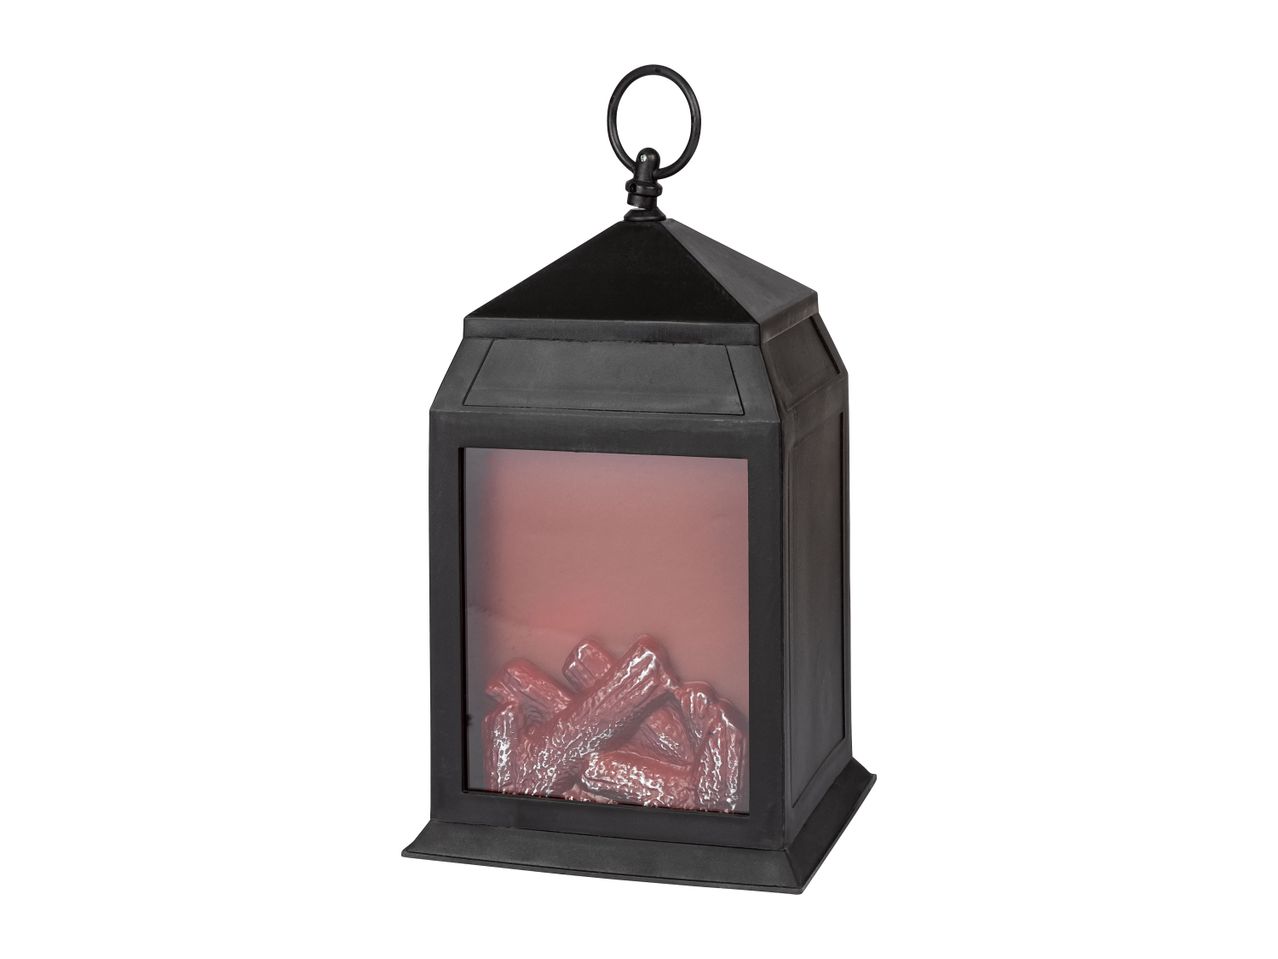 Go to full screen view: Livarno Home Battery Operated LED Fireplace Style Lantern - Image 5